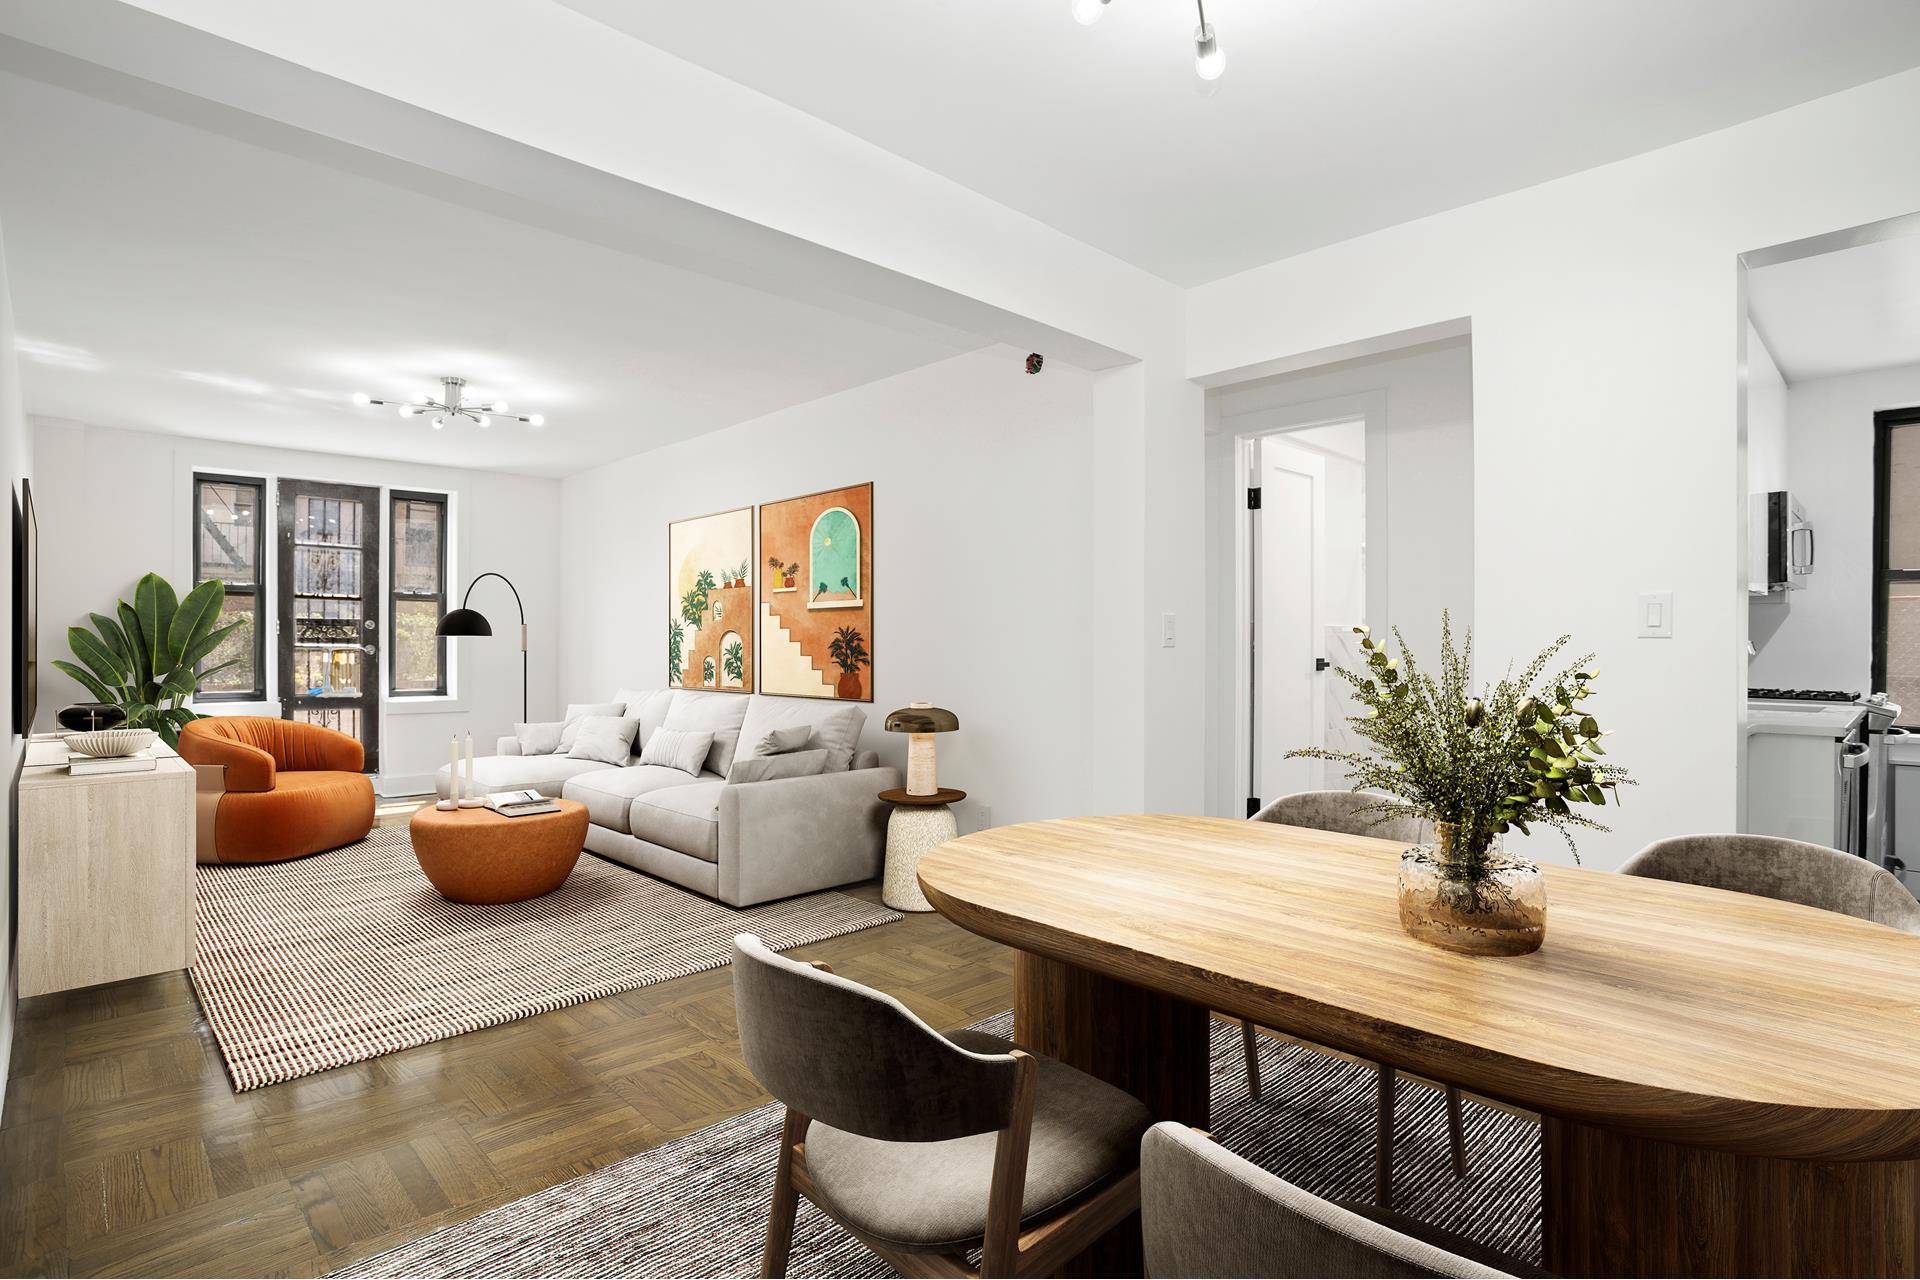 Not on the ground floor. Your dream opportunity is here, to live in an impeccably renovated Sponsor owned 1 bedroom 1 bathroom home with semi private outdoor space.